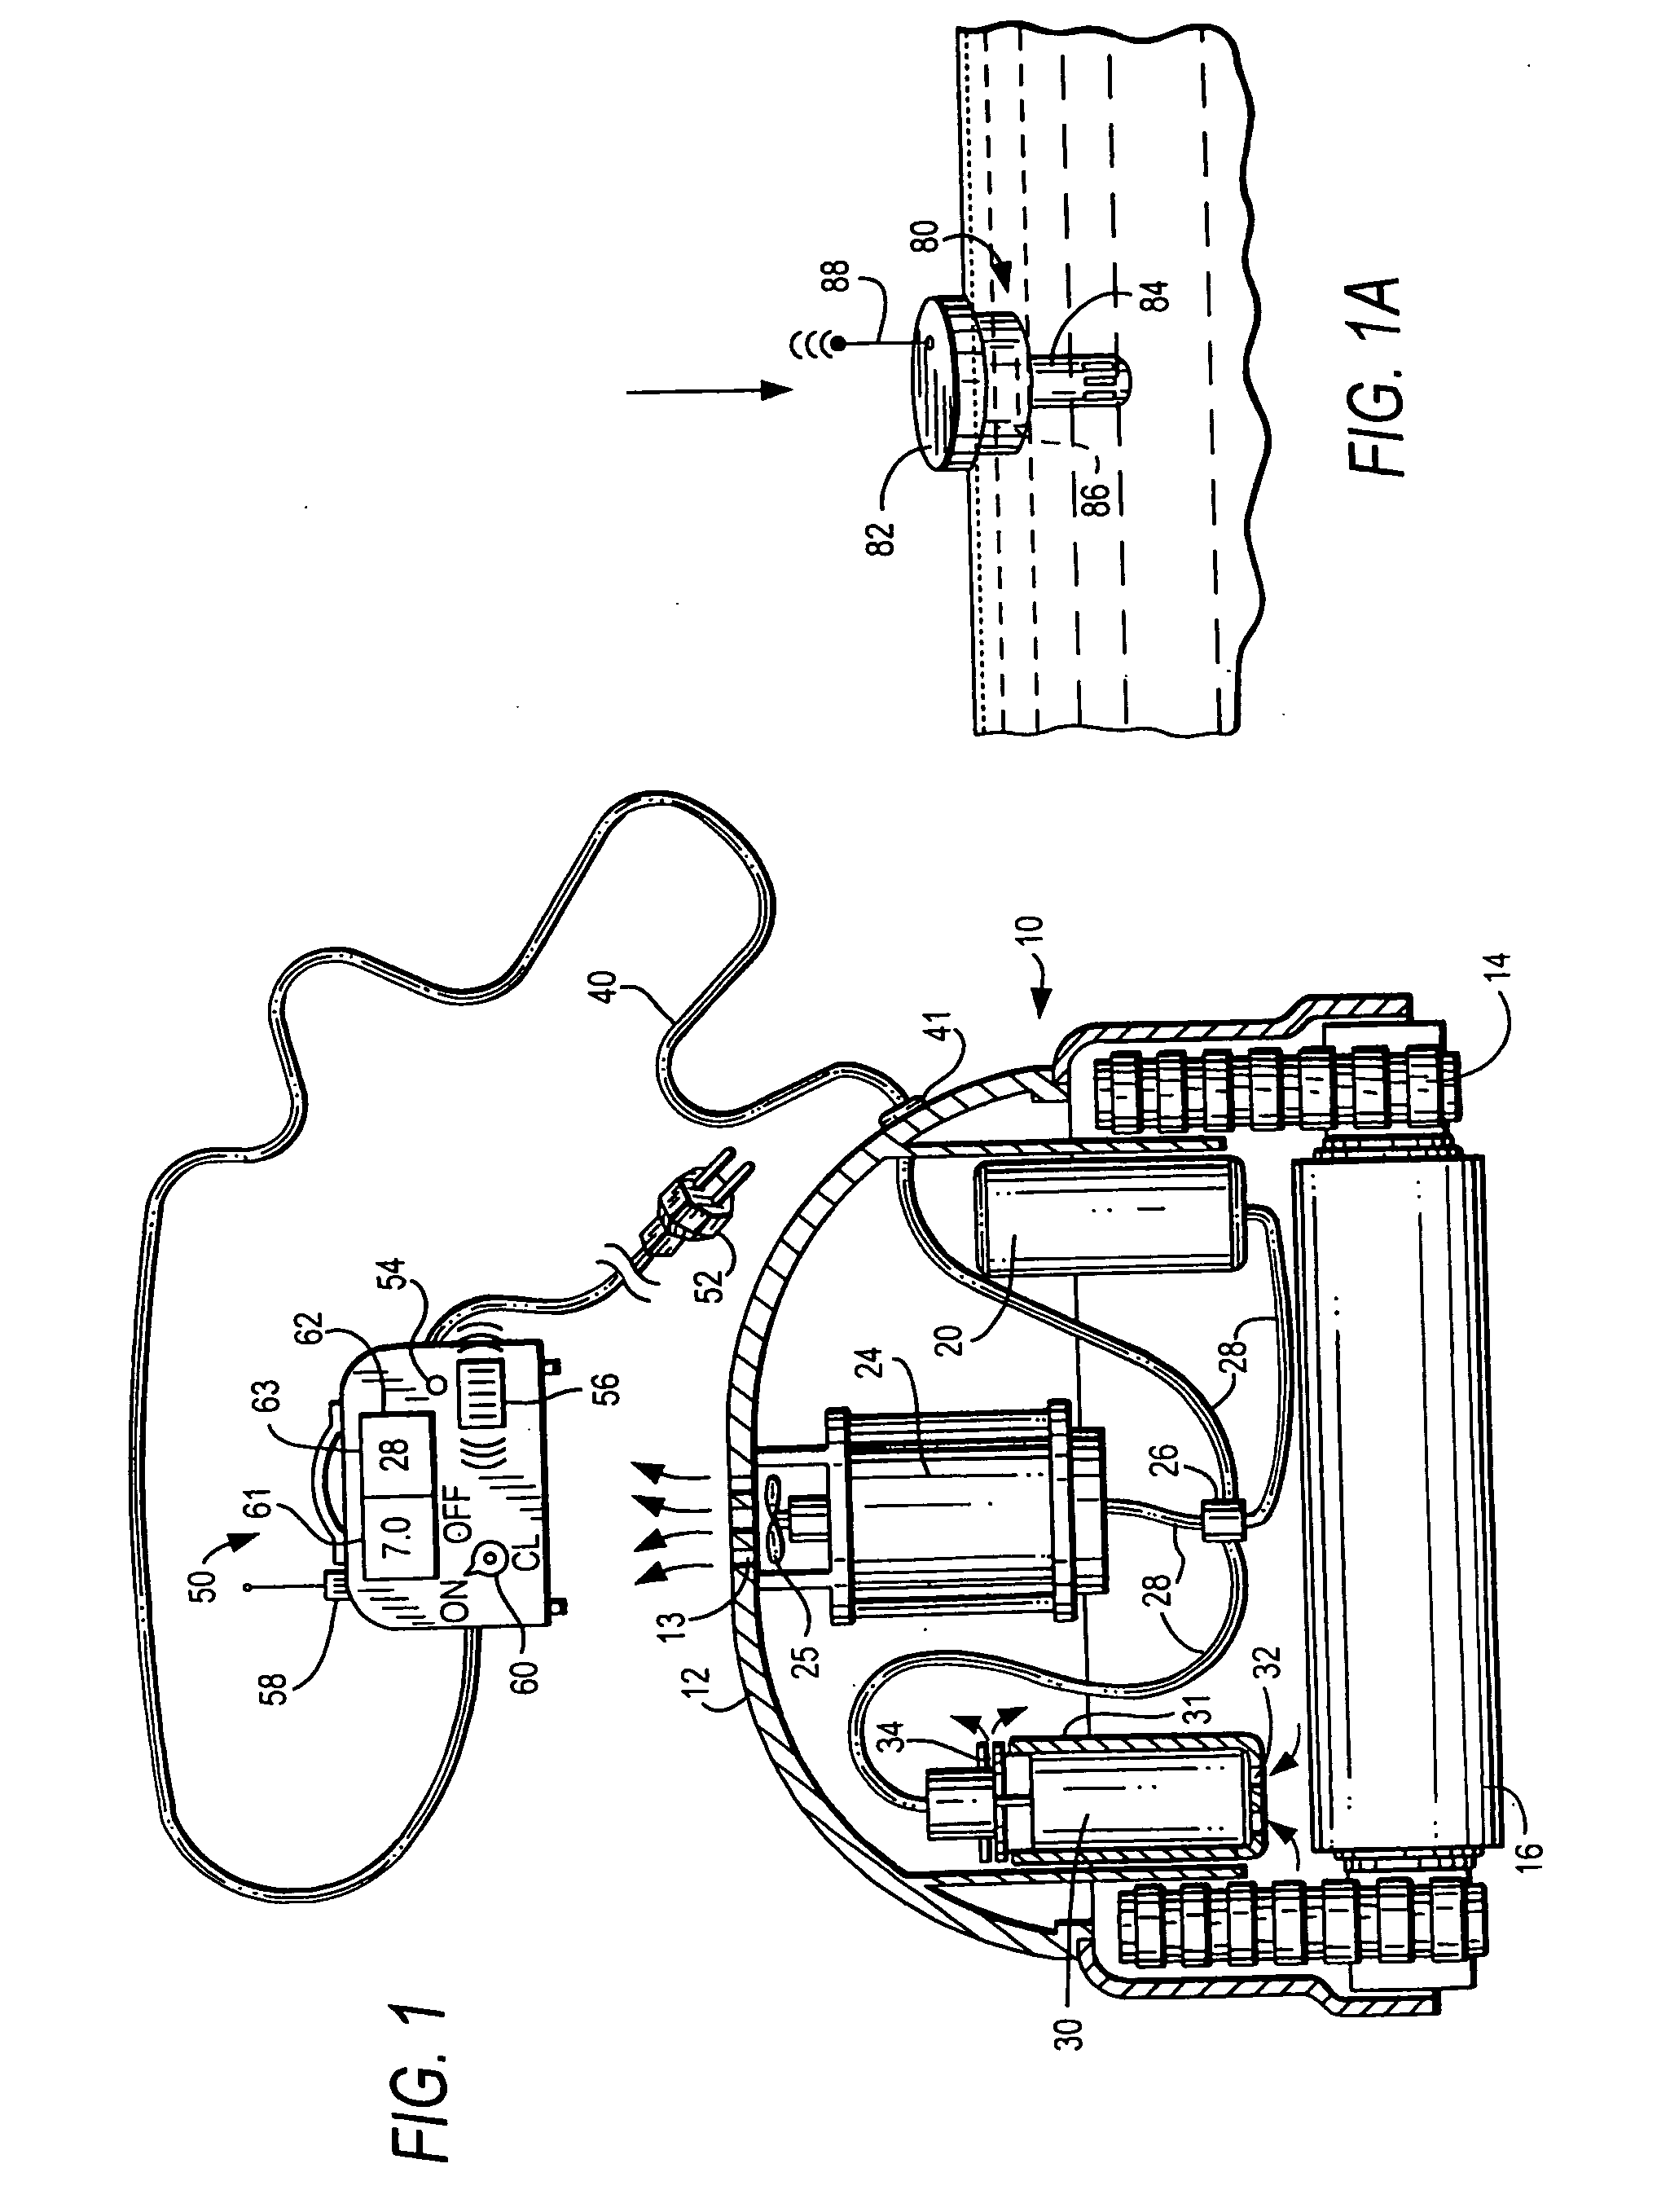 Method and appartus for operation of pool cleaner with integral chlorine generator